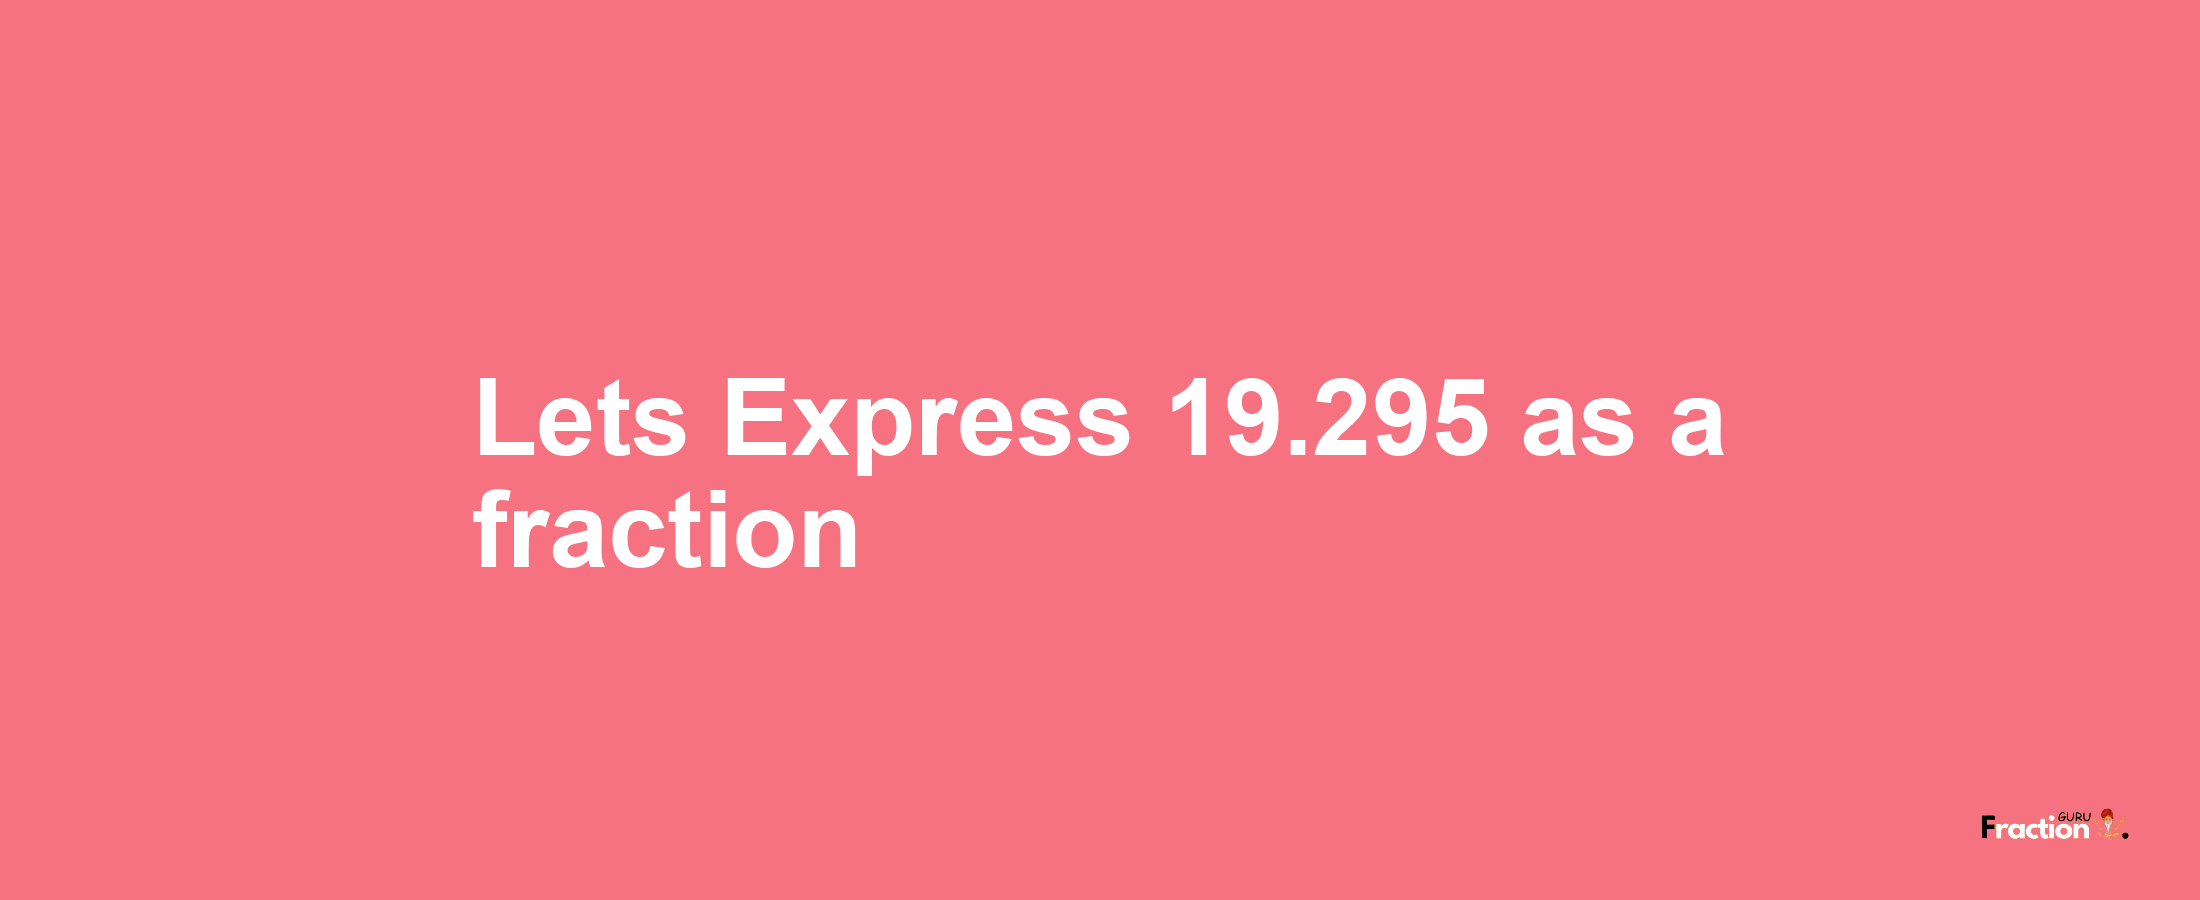 Lets Express 19.295 as afraction